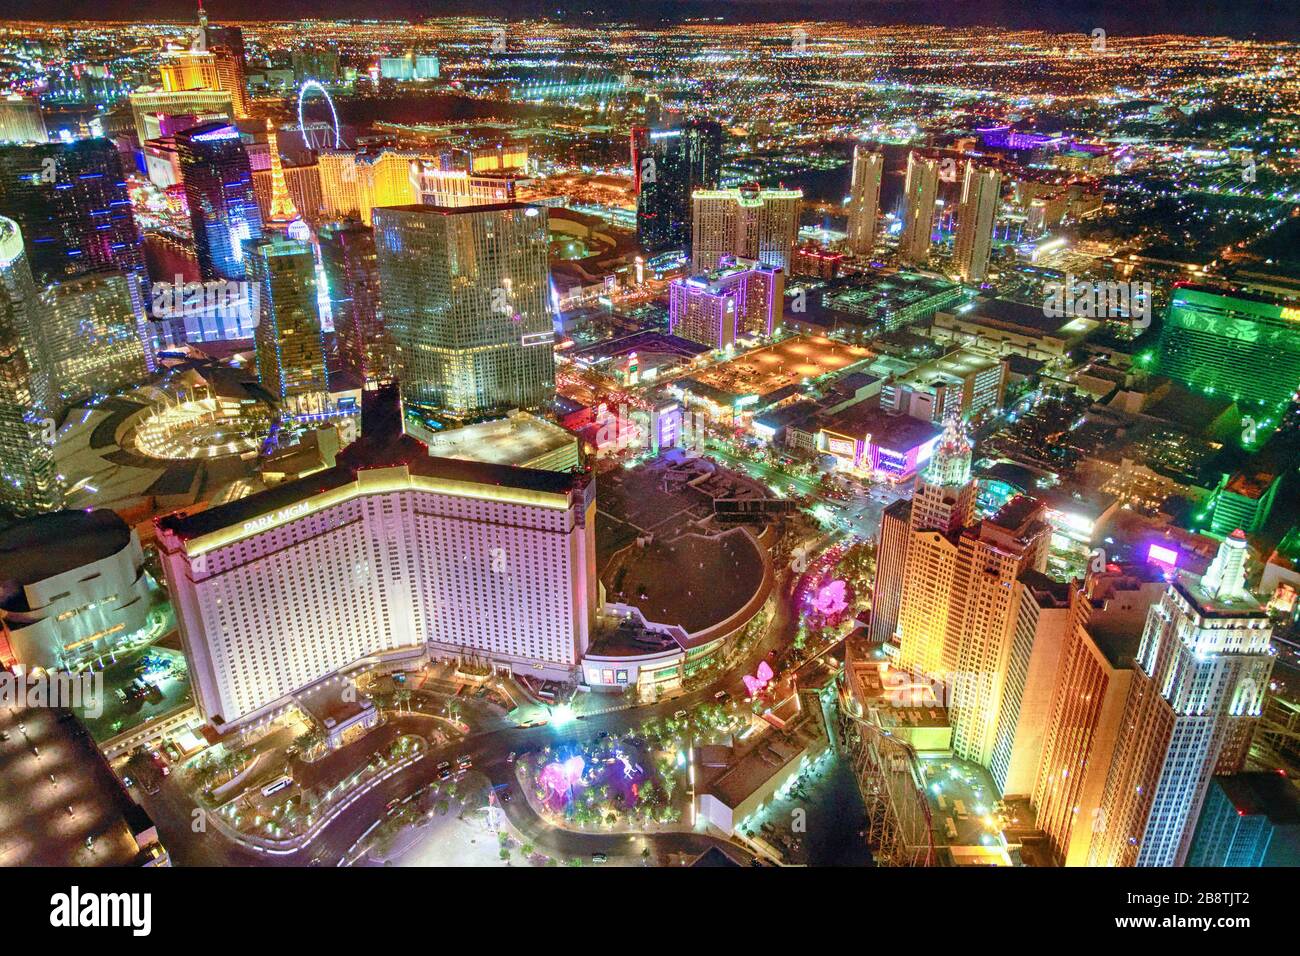 LAS VEGAS, NV - JUNE 30, 2018: Night lights of the Strip from helicopter. Las Vegas is a famous gambling destination. Stock Photo